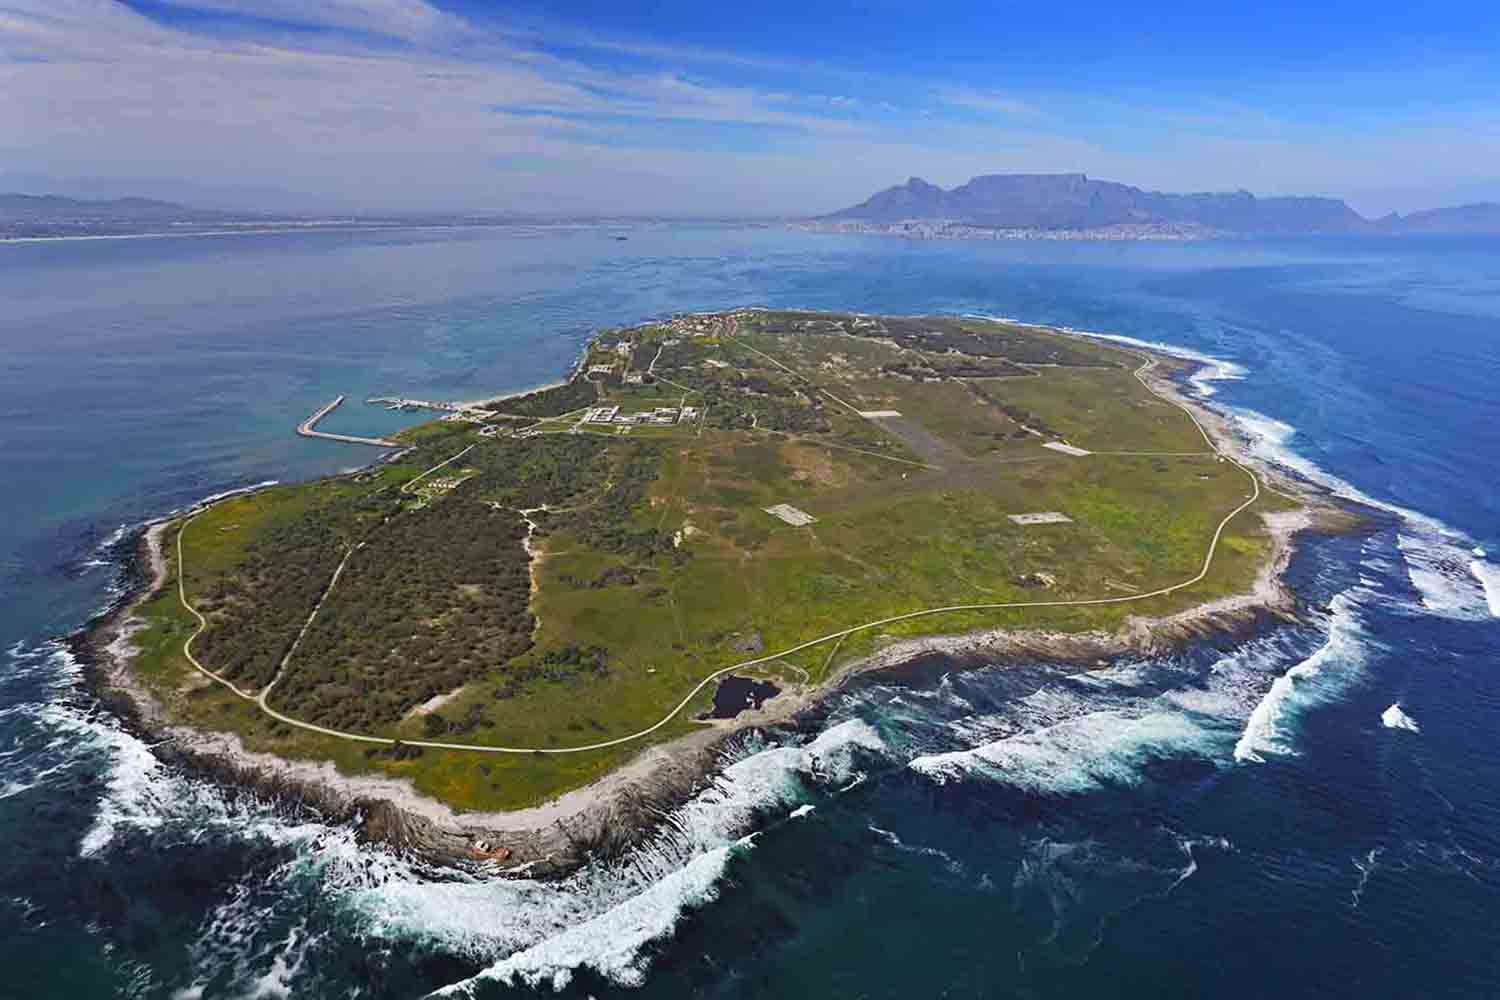 Aerial view of the island during the daytime